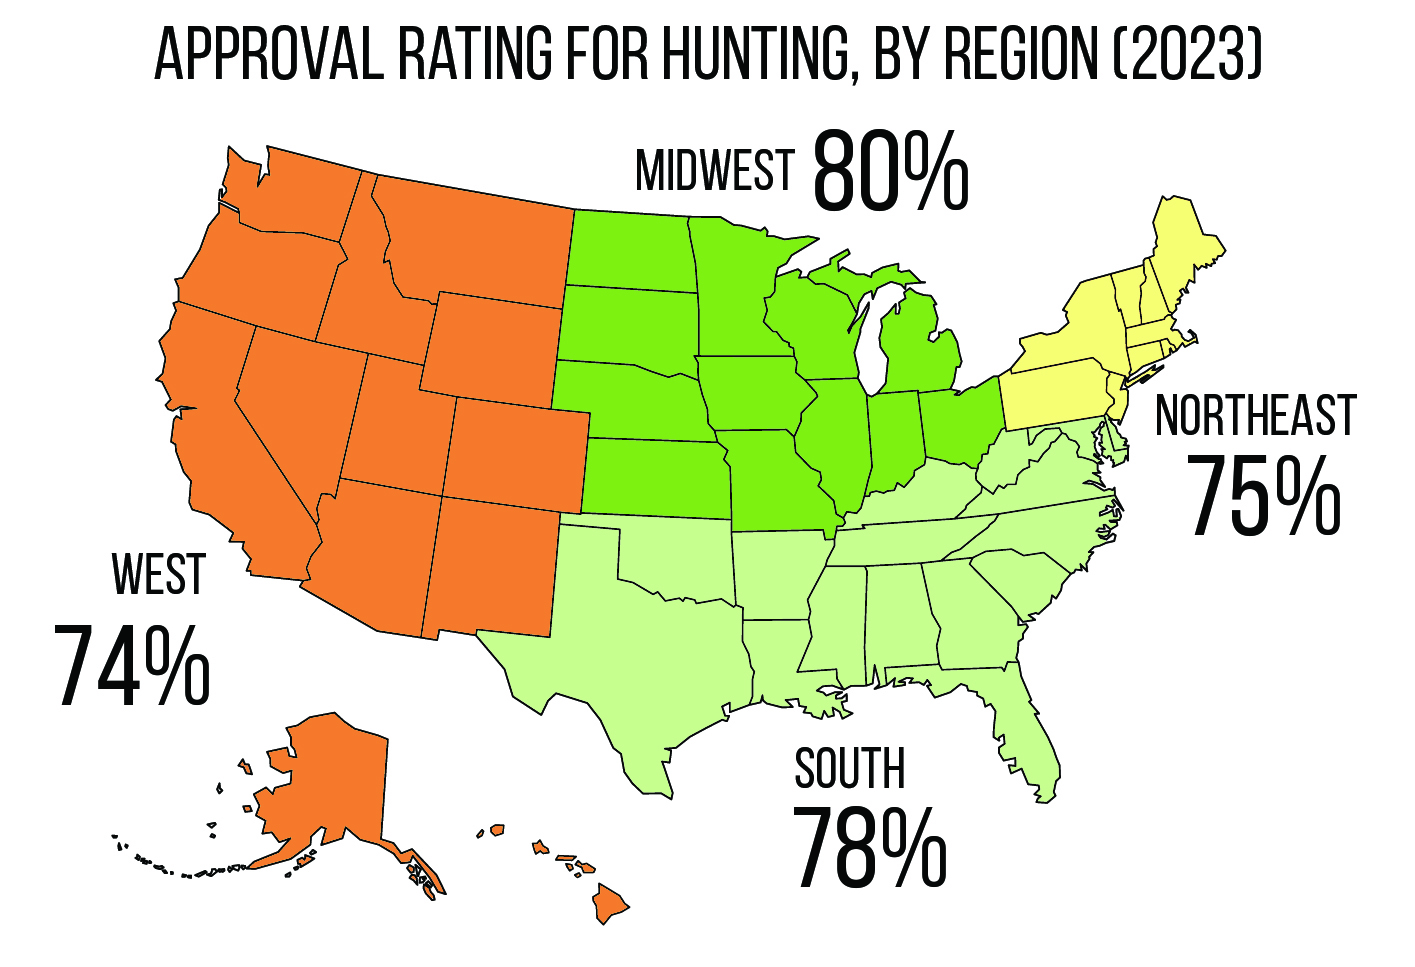 A map of hunting approval by region in the United States.